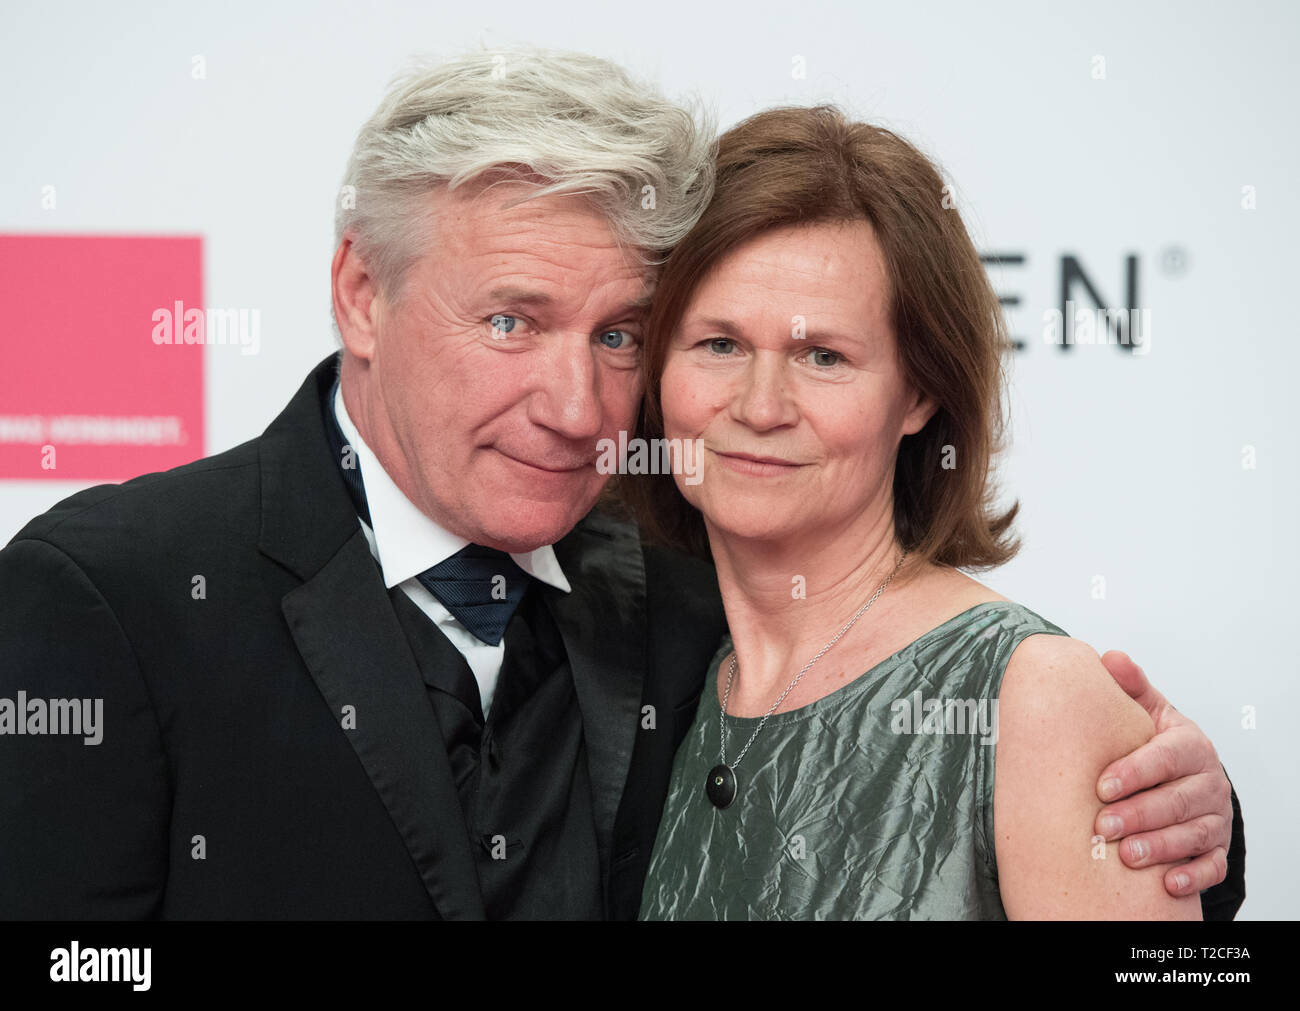 Actor Joerg SCHUETTAUF (nominated for the category 'Best Actor') with wife Martina BEECK Red carpet for the Golden Camera 2019 in Berlin, Germany on 30.03.2019. | Usage worldwide Stock Photo